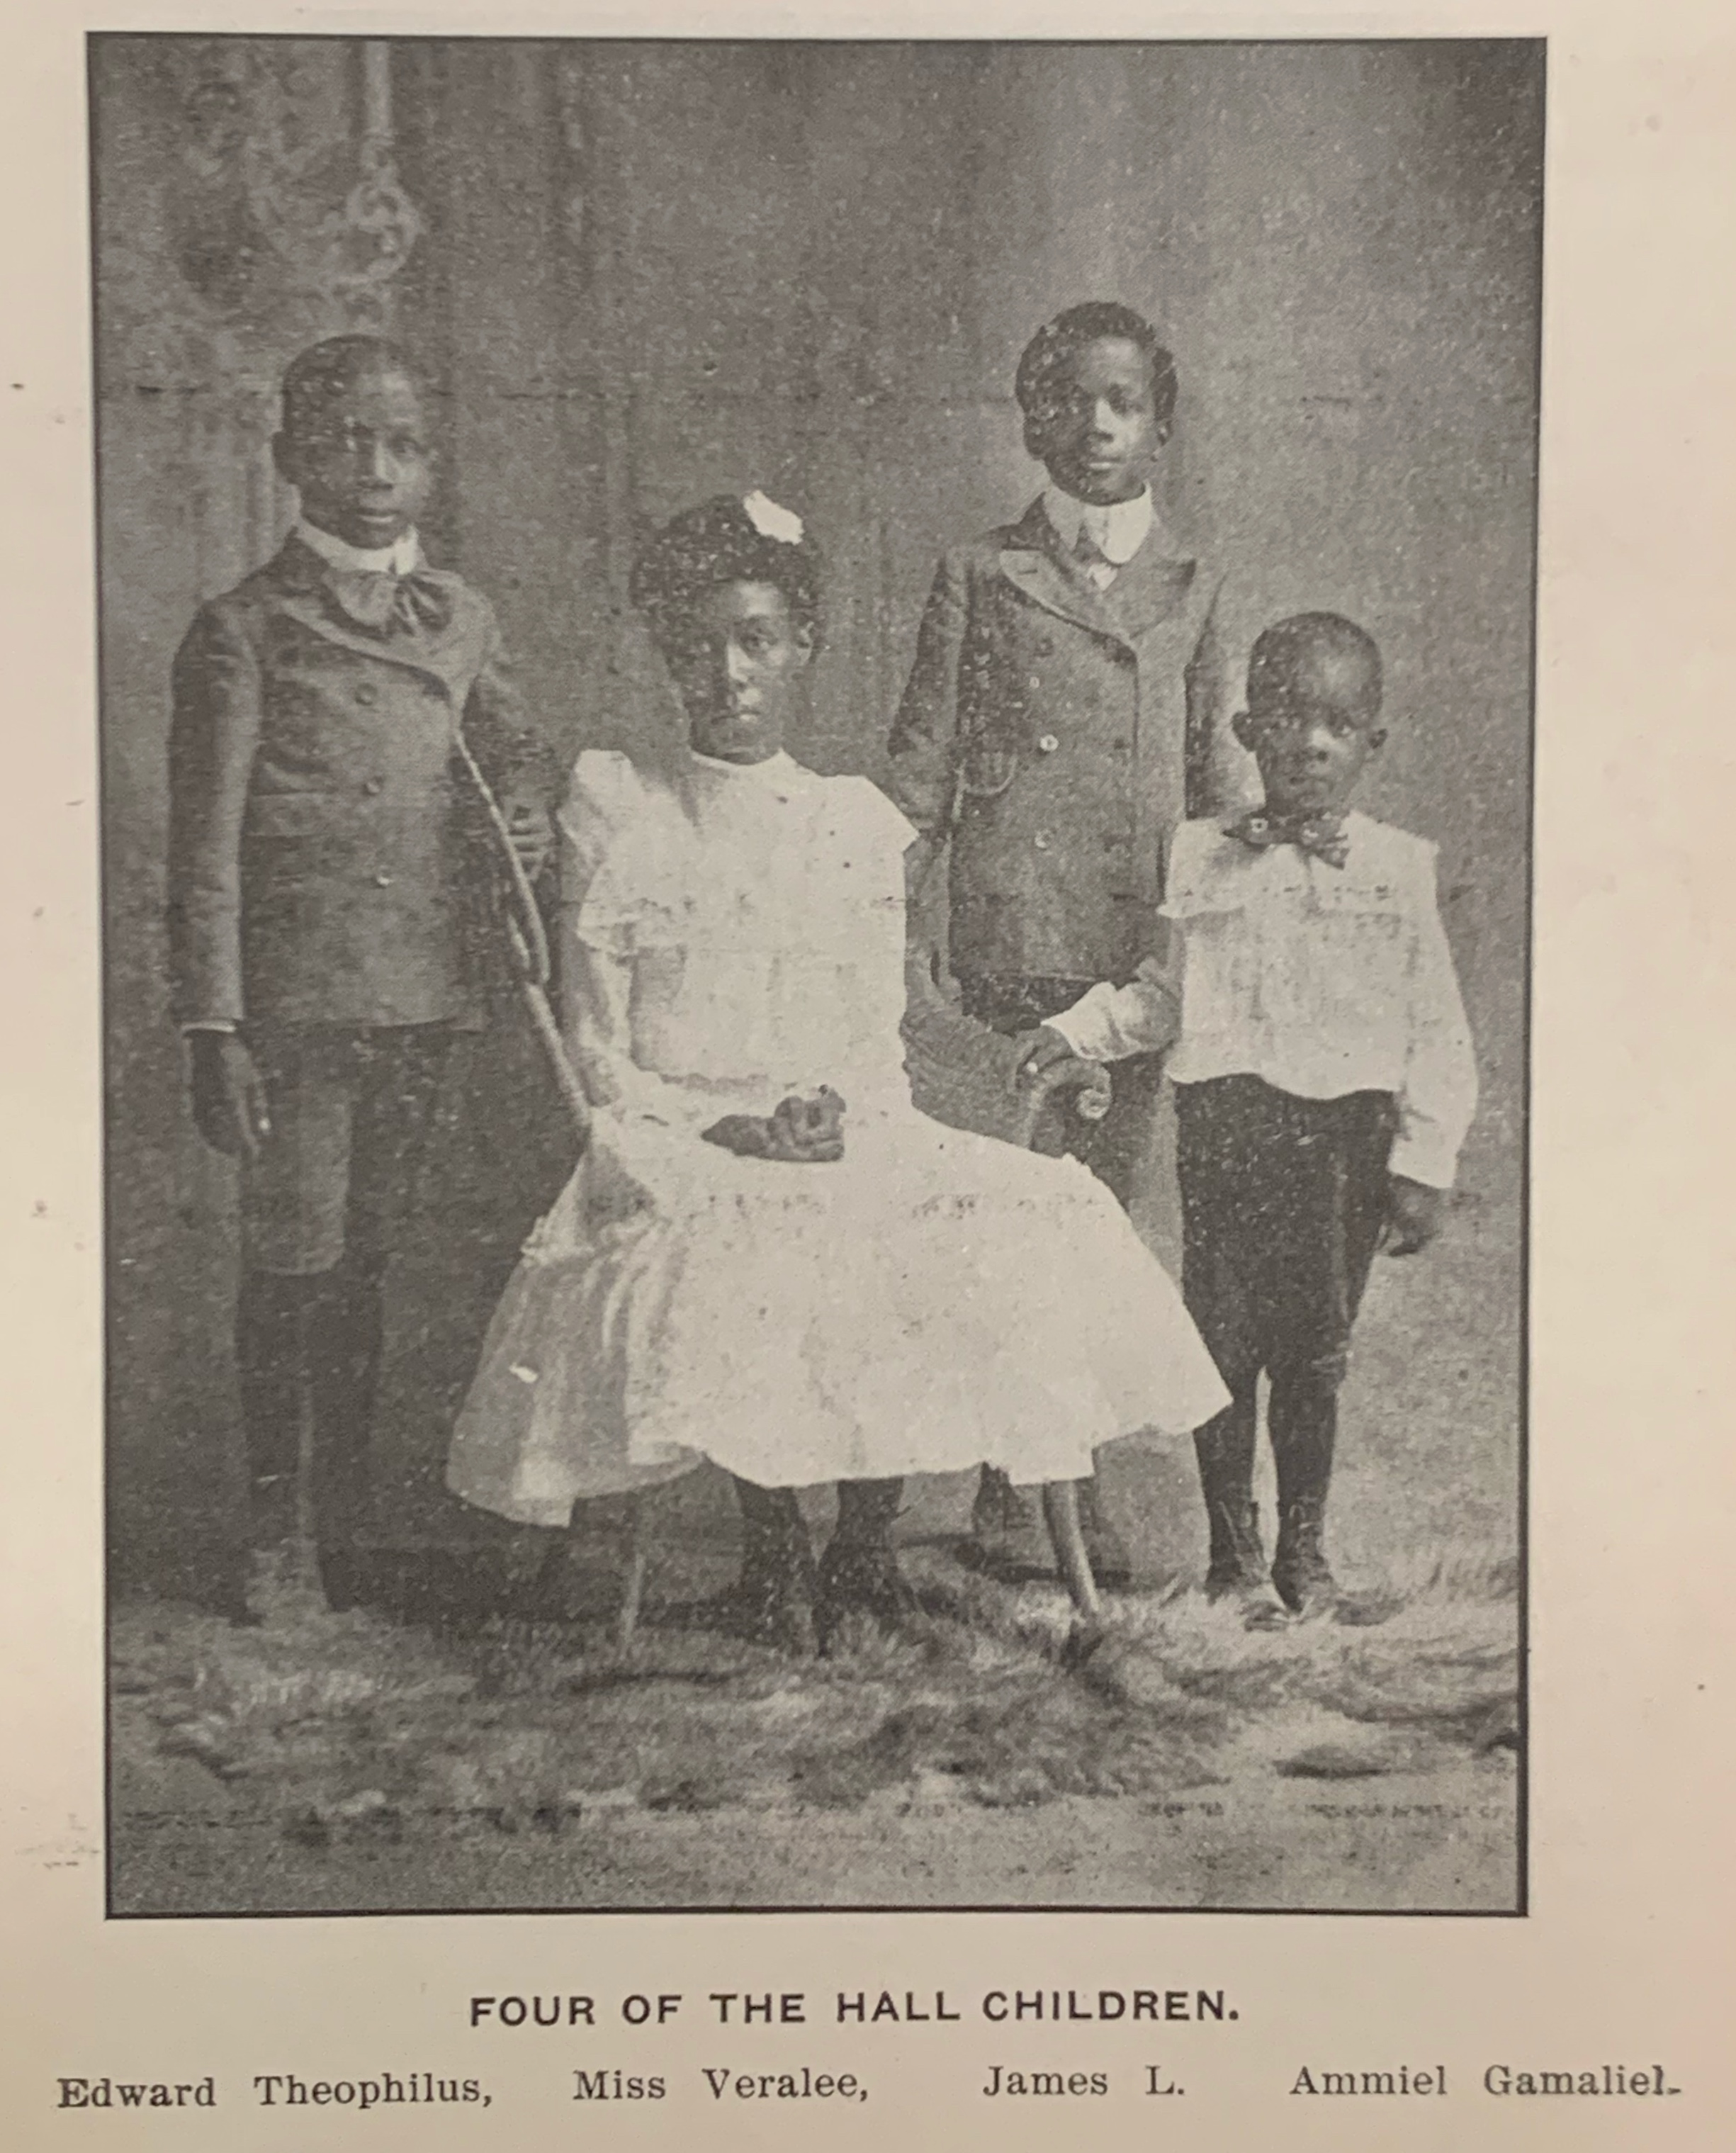 Four African-American children, three boys and one seated girl, in 1900's style clothing. Text reads: Four of the Hall children. Edward Theophilus, Miss Veralee, James L., Ammiel Gamaliel.